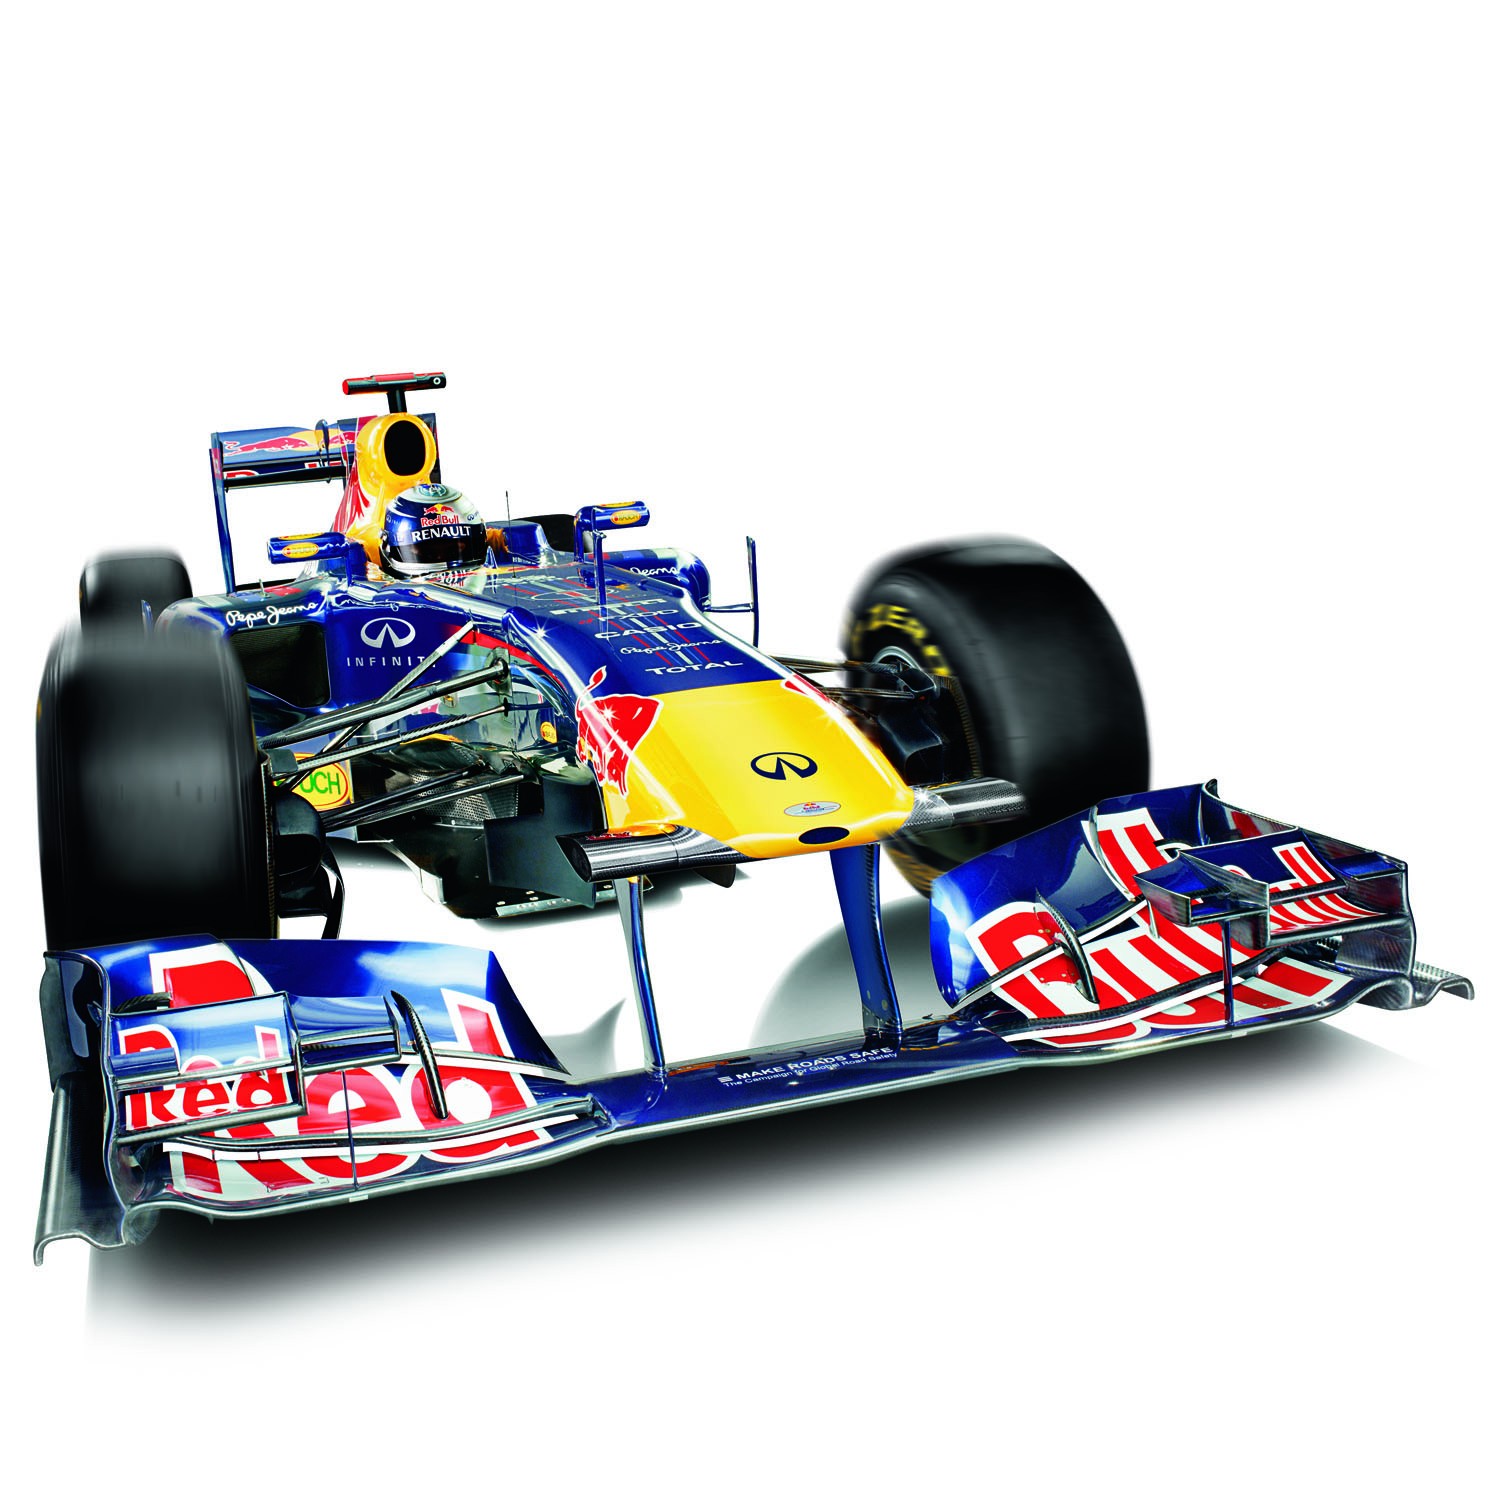  quot Gas Powered RC Car quot Red Bull RB7 Formula One Racing Car 1 7 Scale Model Red Bull Racing RB7 